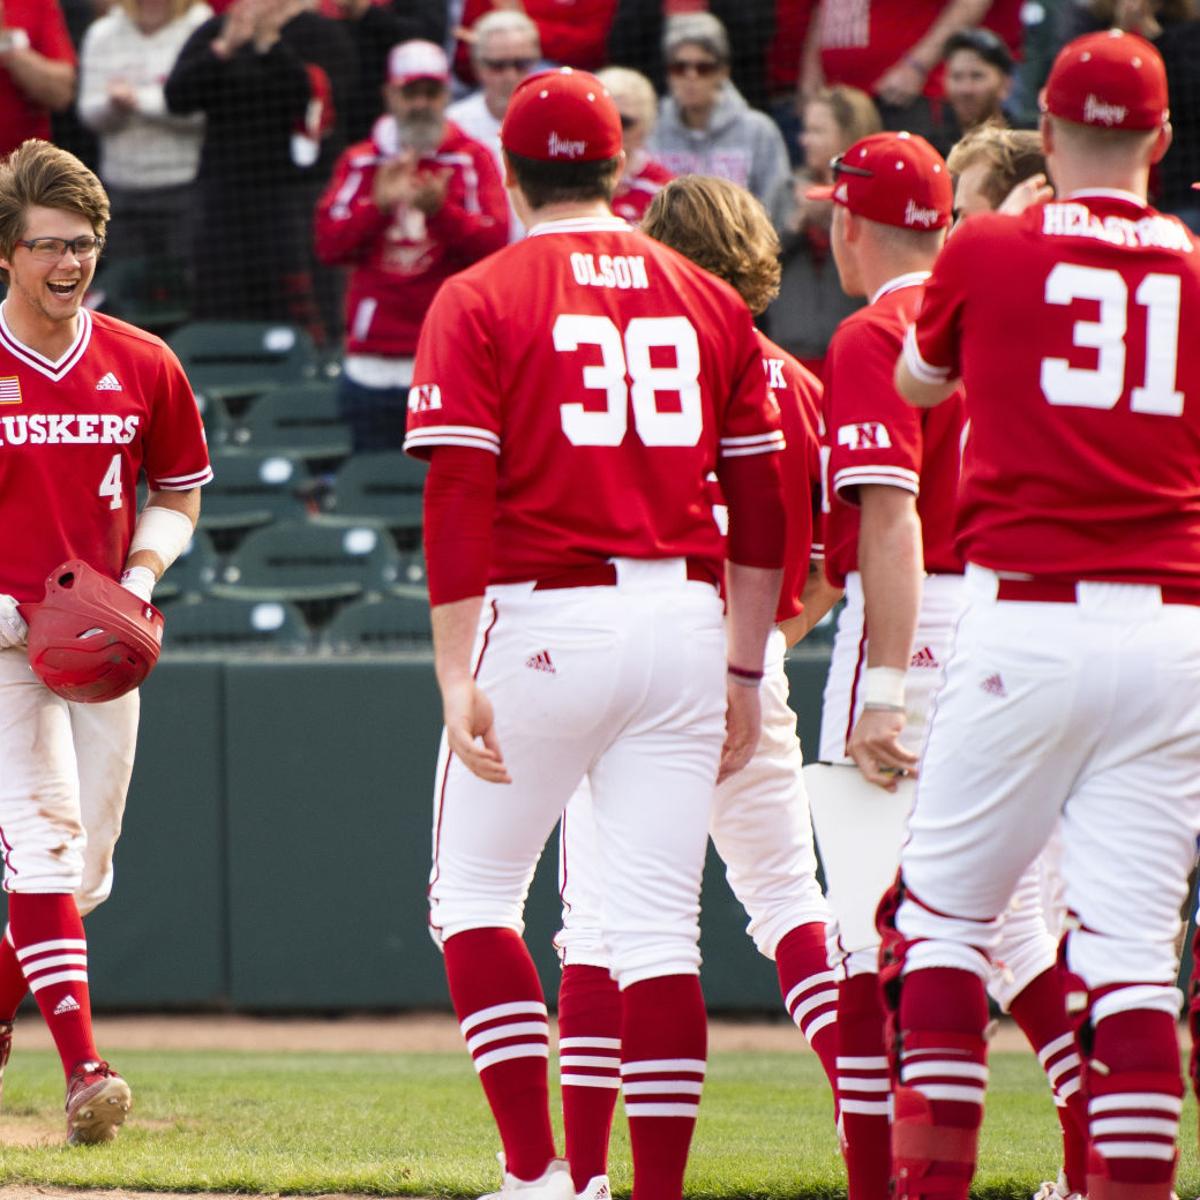 Nebraska Baseball 2022 Schedule Nu Releases Its 2022 Baseball Schedule: Here Are Some Takeaways (And The  Full Schedule) | Baseball | Journalstar.com